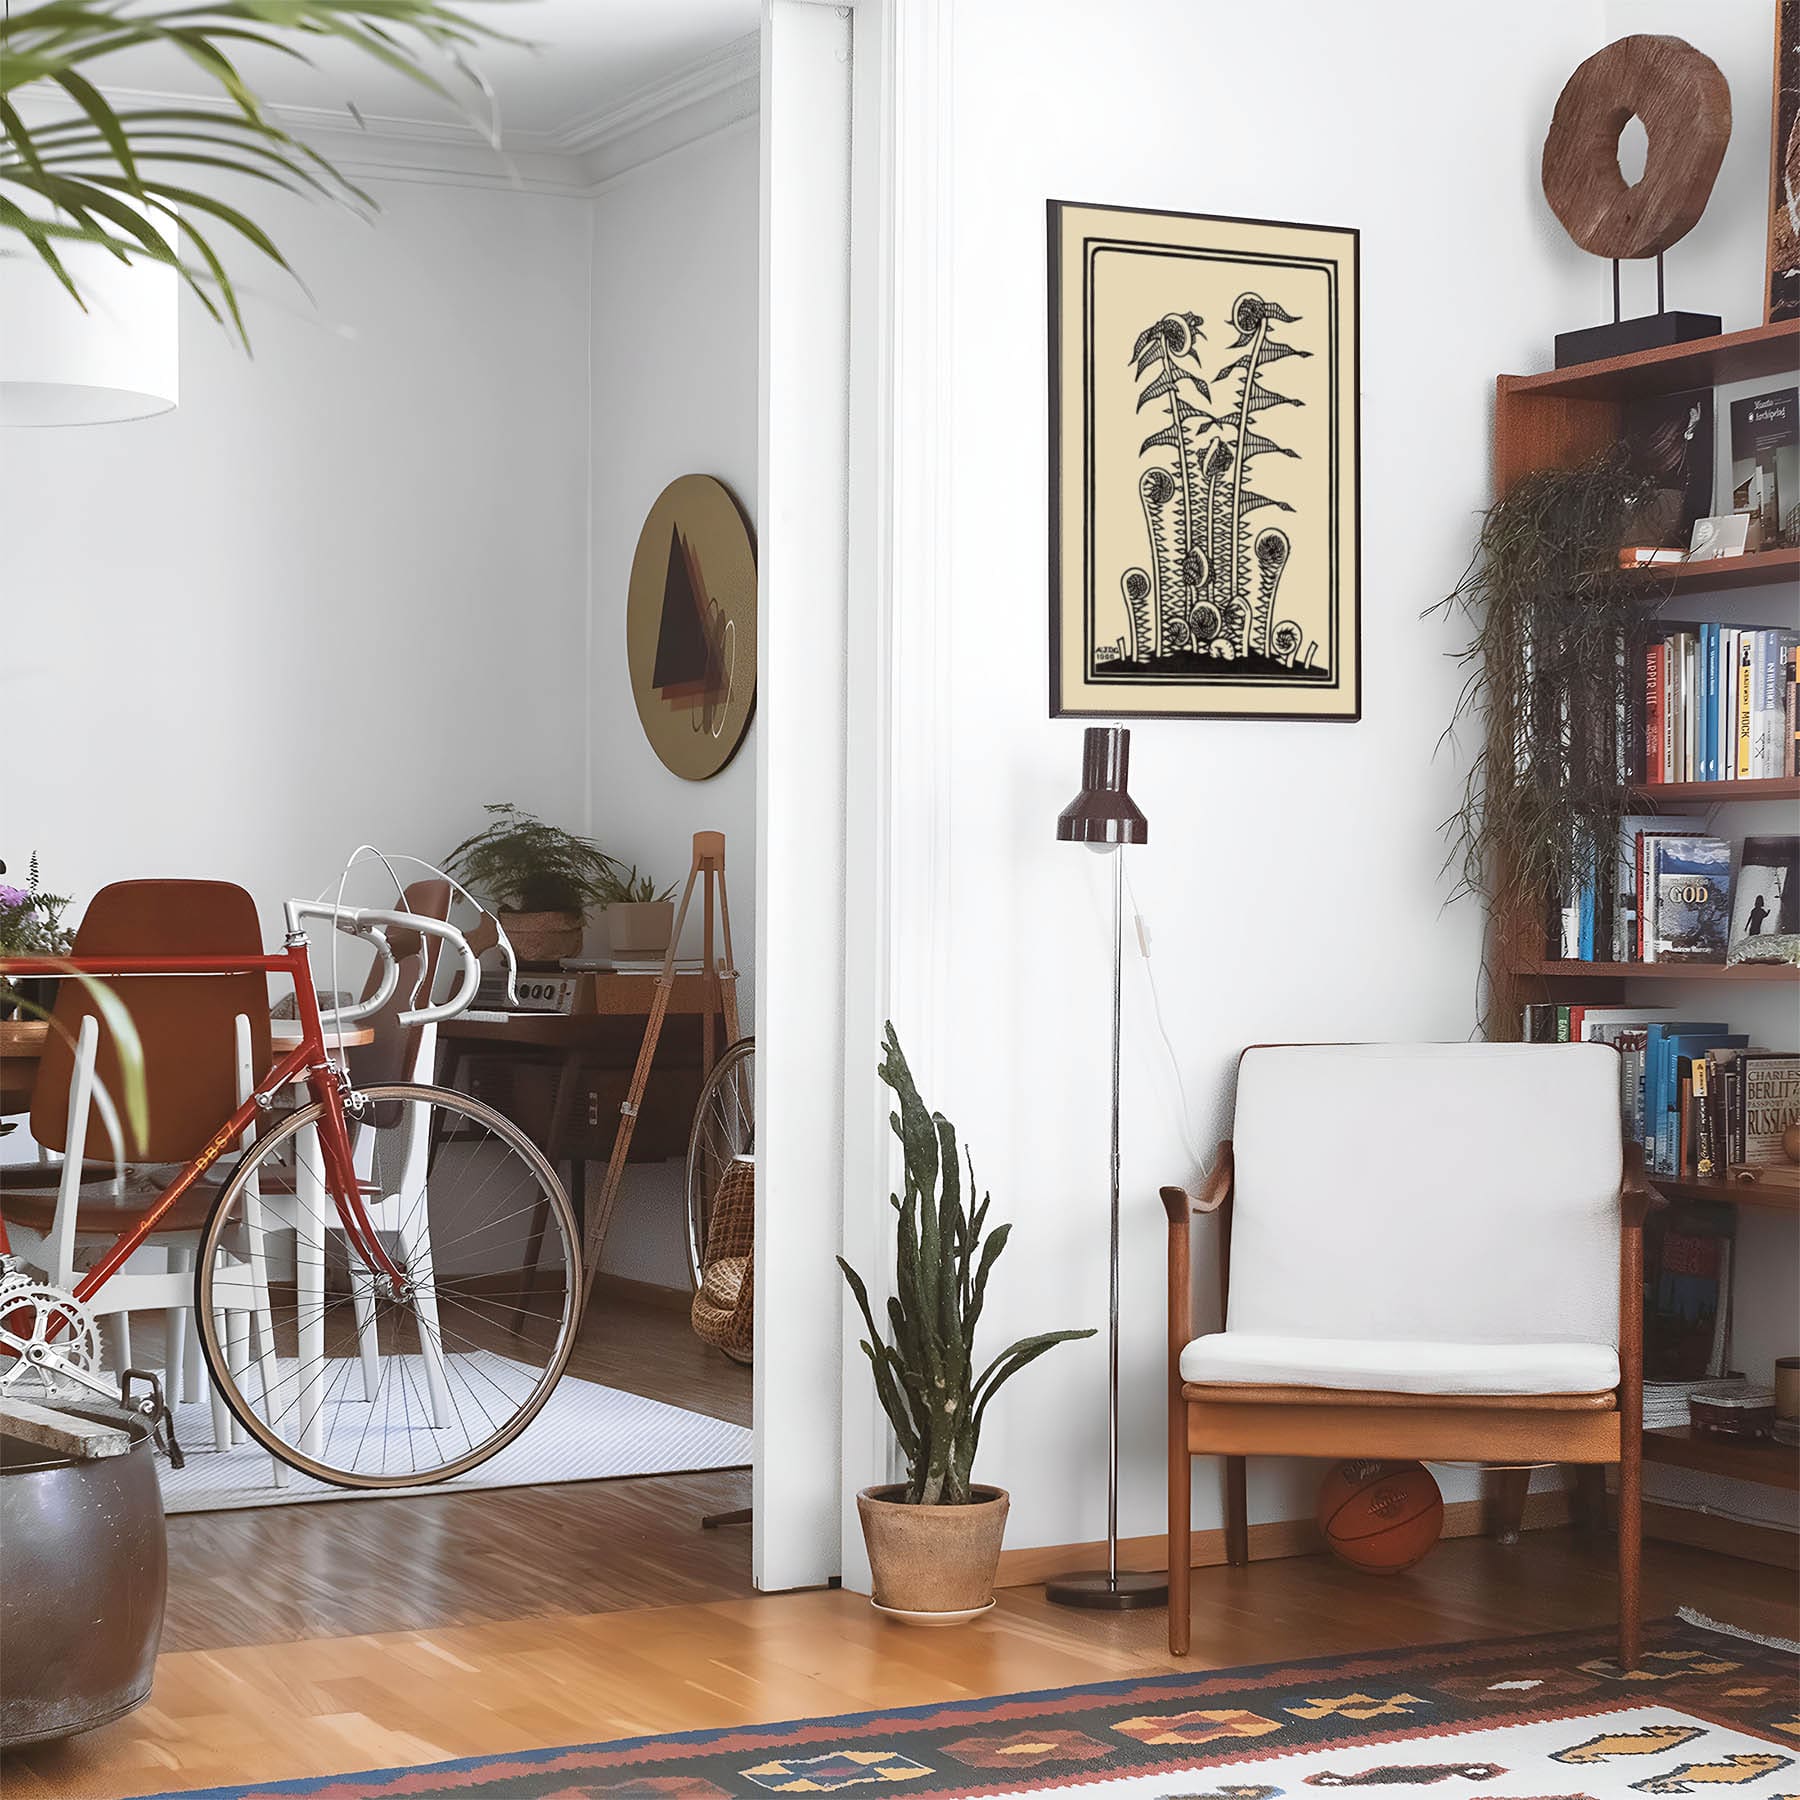 Eclectic living room with a road bike, bookshelf and house plants that features framed artwork of a Black Ferns above a chair and lamp